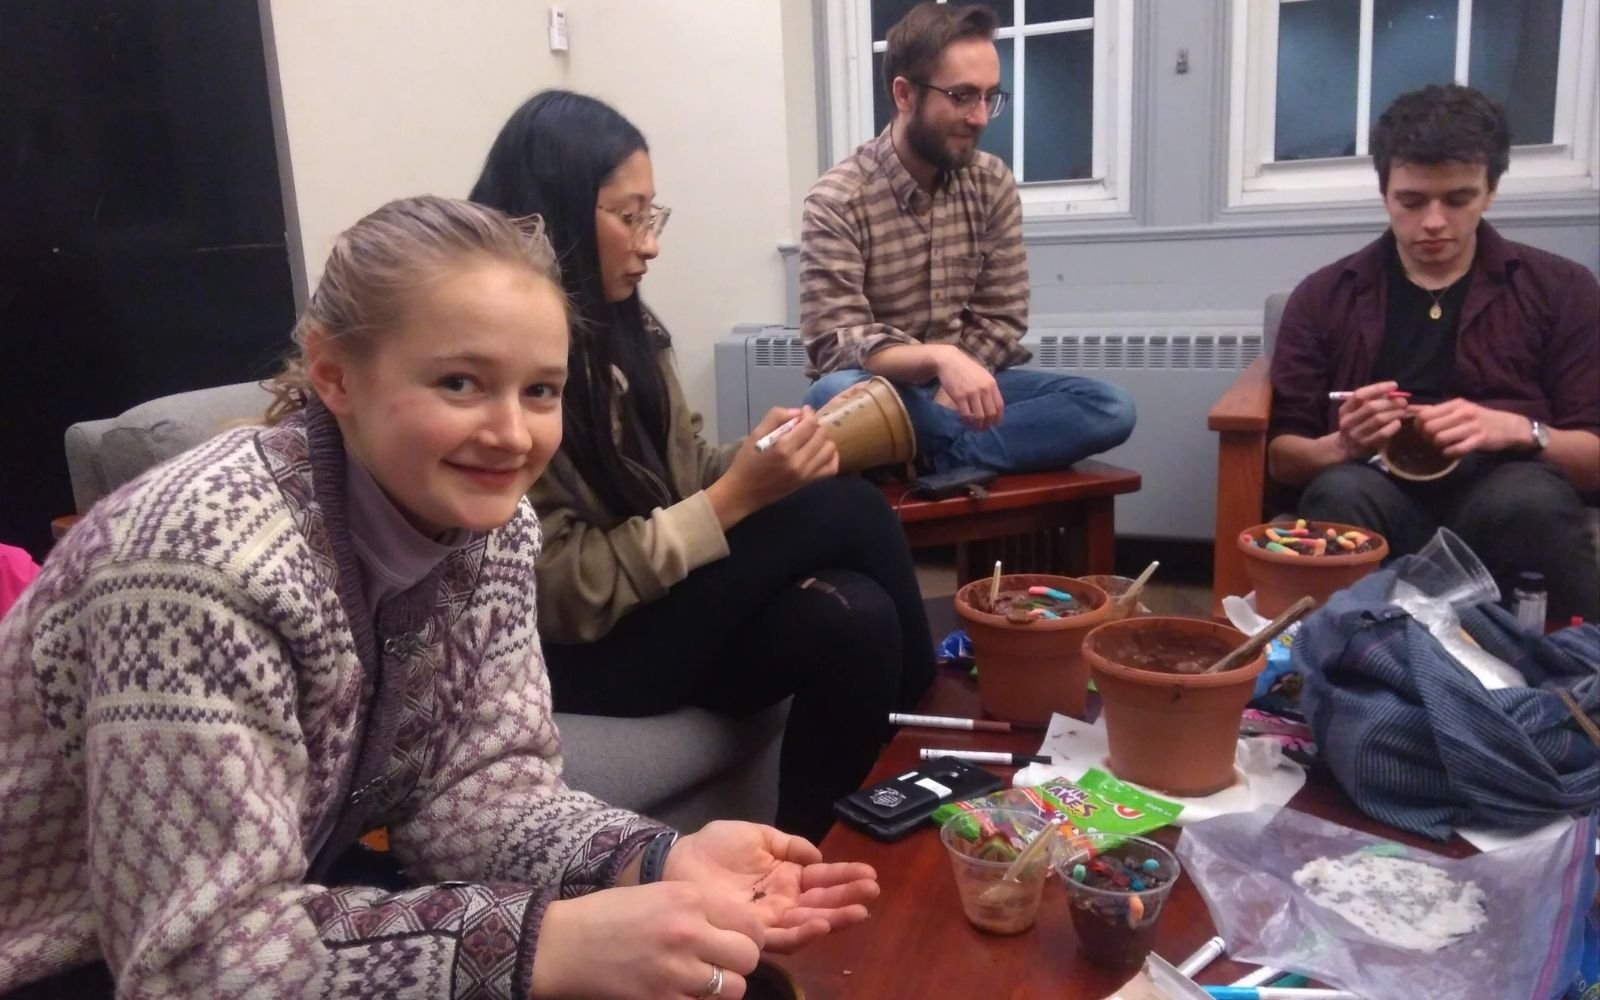 A group of students sit around a table in a dorm lounge covered with craft supplies